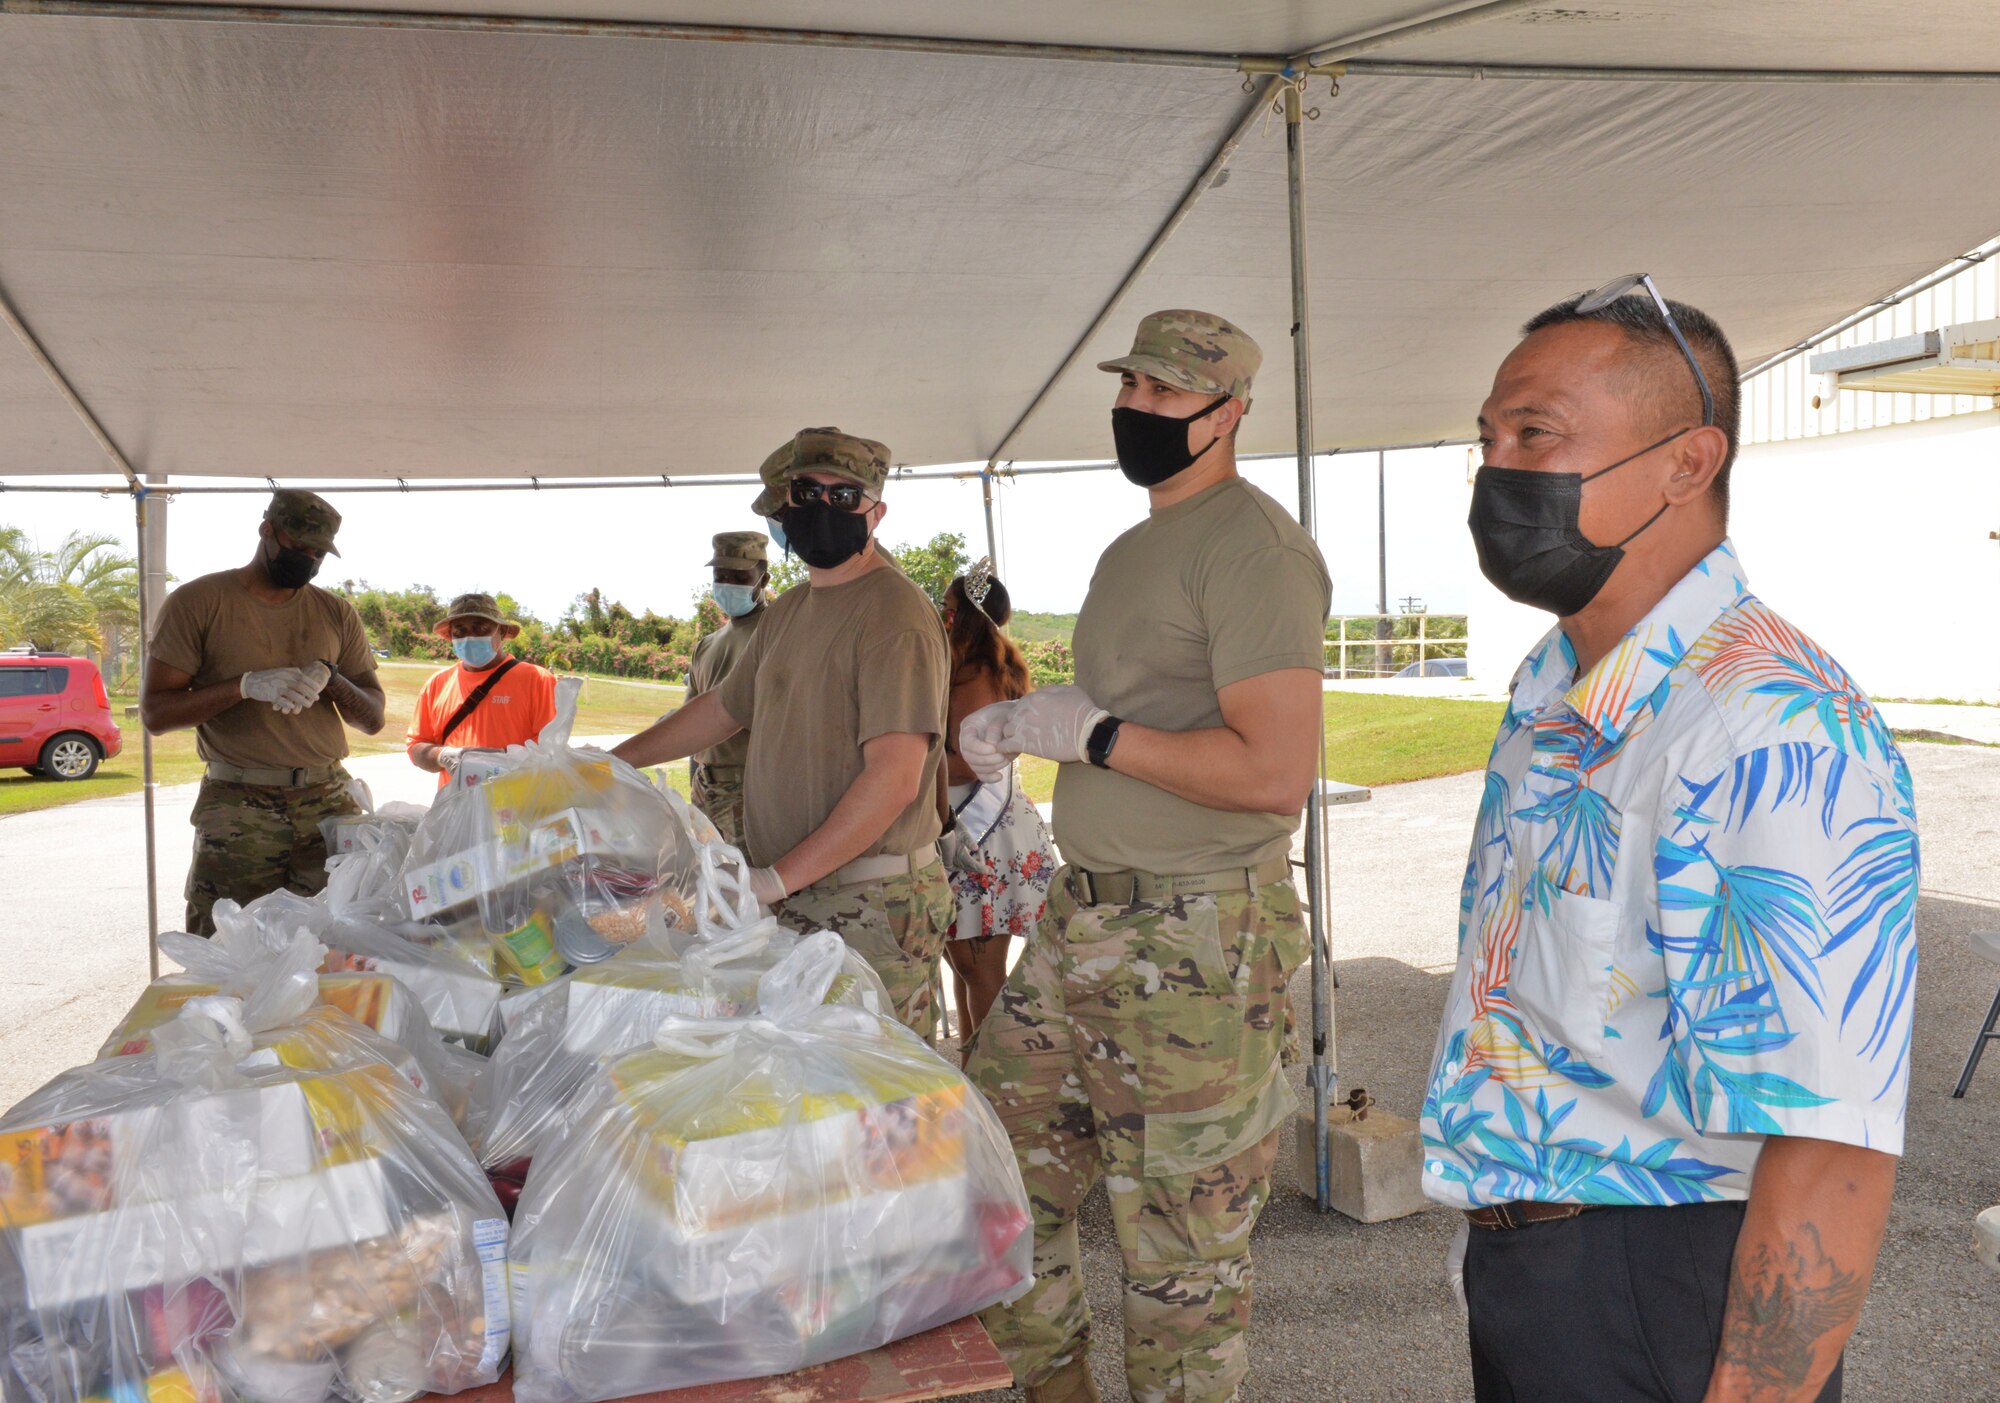 U.S. Air Force Airmen assigned to the 36th Civil Engineering Squadron and Kylani Ogo, Miss Voluptuous Pacific and Yona resident, participate a COVID-19 relief food distribution event at the community gym in Yona, Guam, April 15, 2021. The 36th CES is Yona’s sister squadron, as part of the Andersen Air Force Base Sister Village Sister Squadron program, through which squadron members collaborate with Guam residents in activities to strengthen their friendship and partnership. (U.S. Air Force photo by Alana Chargualaf)